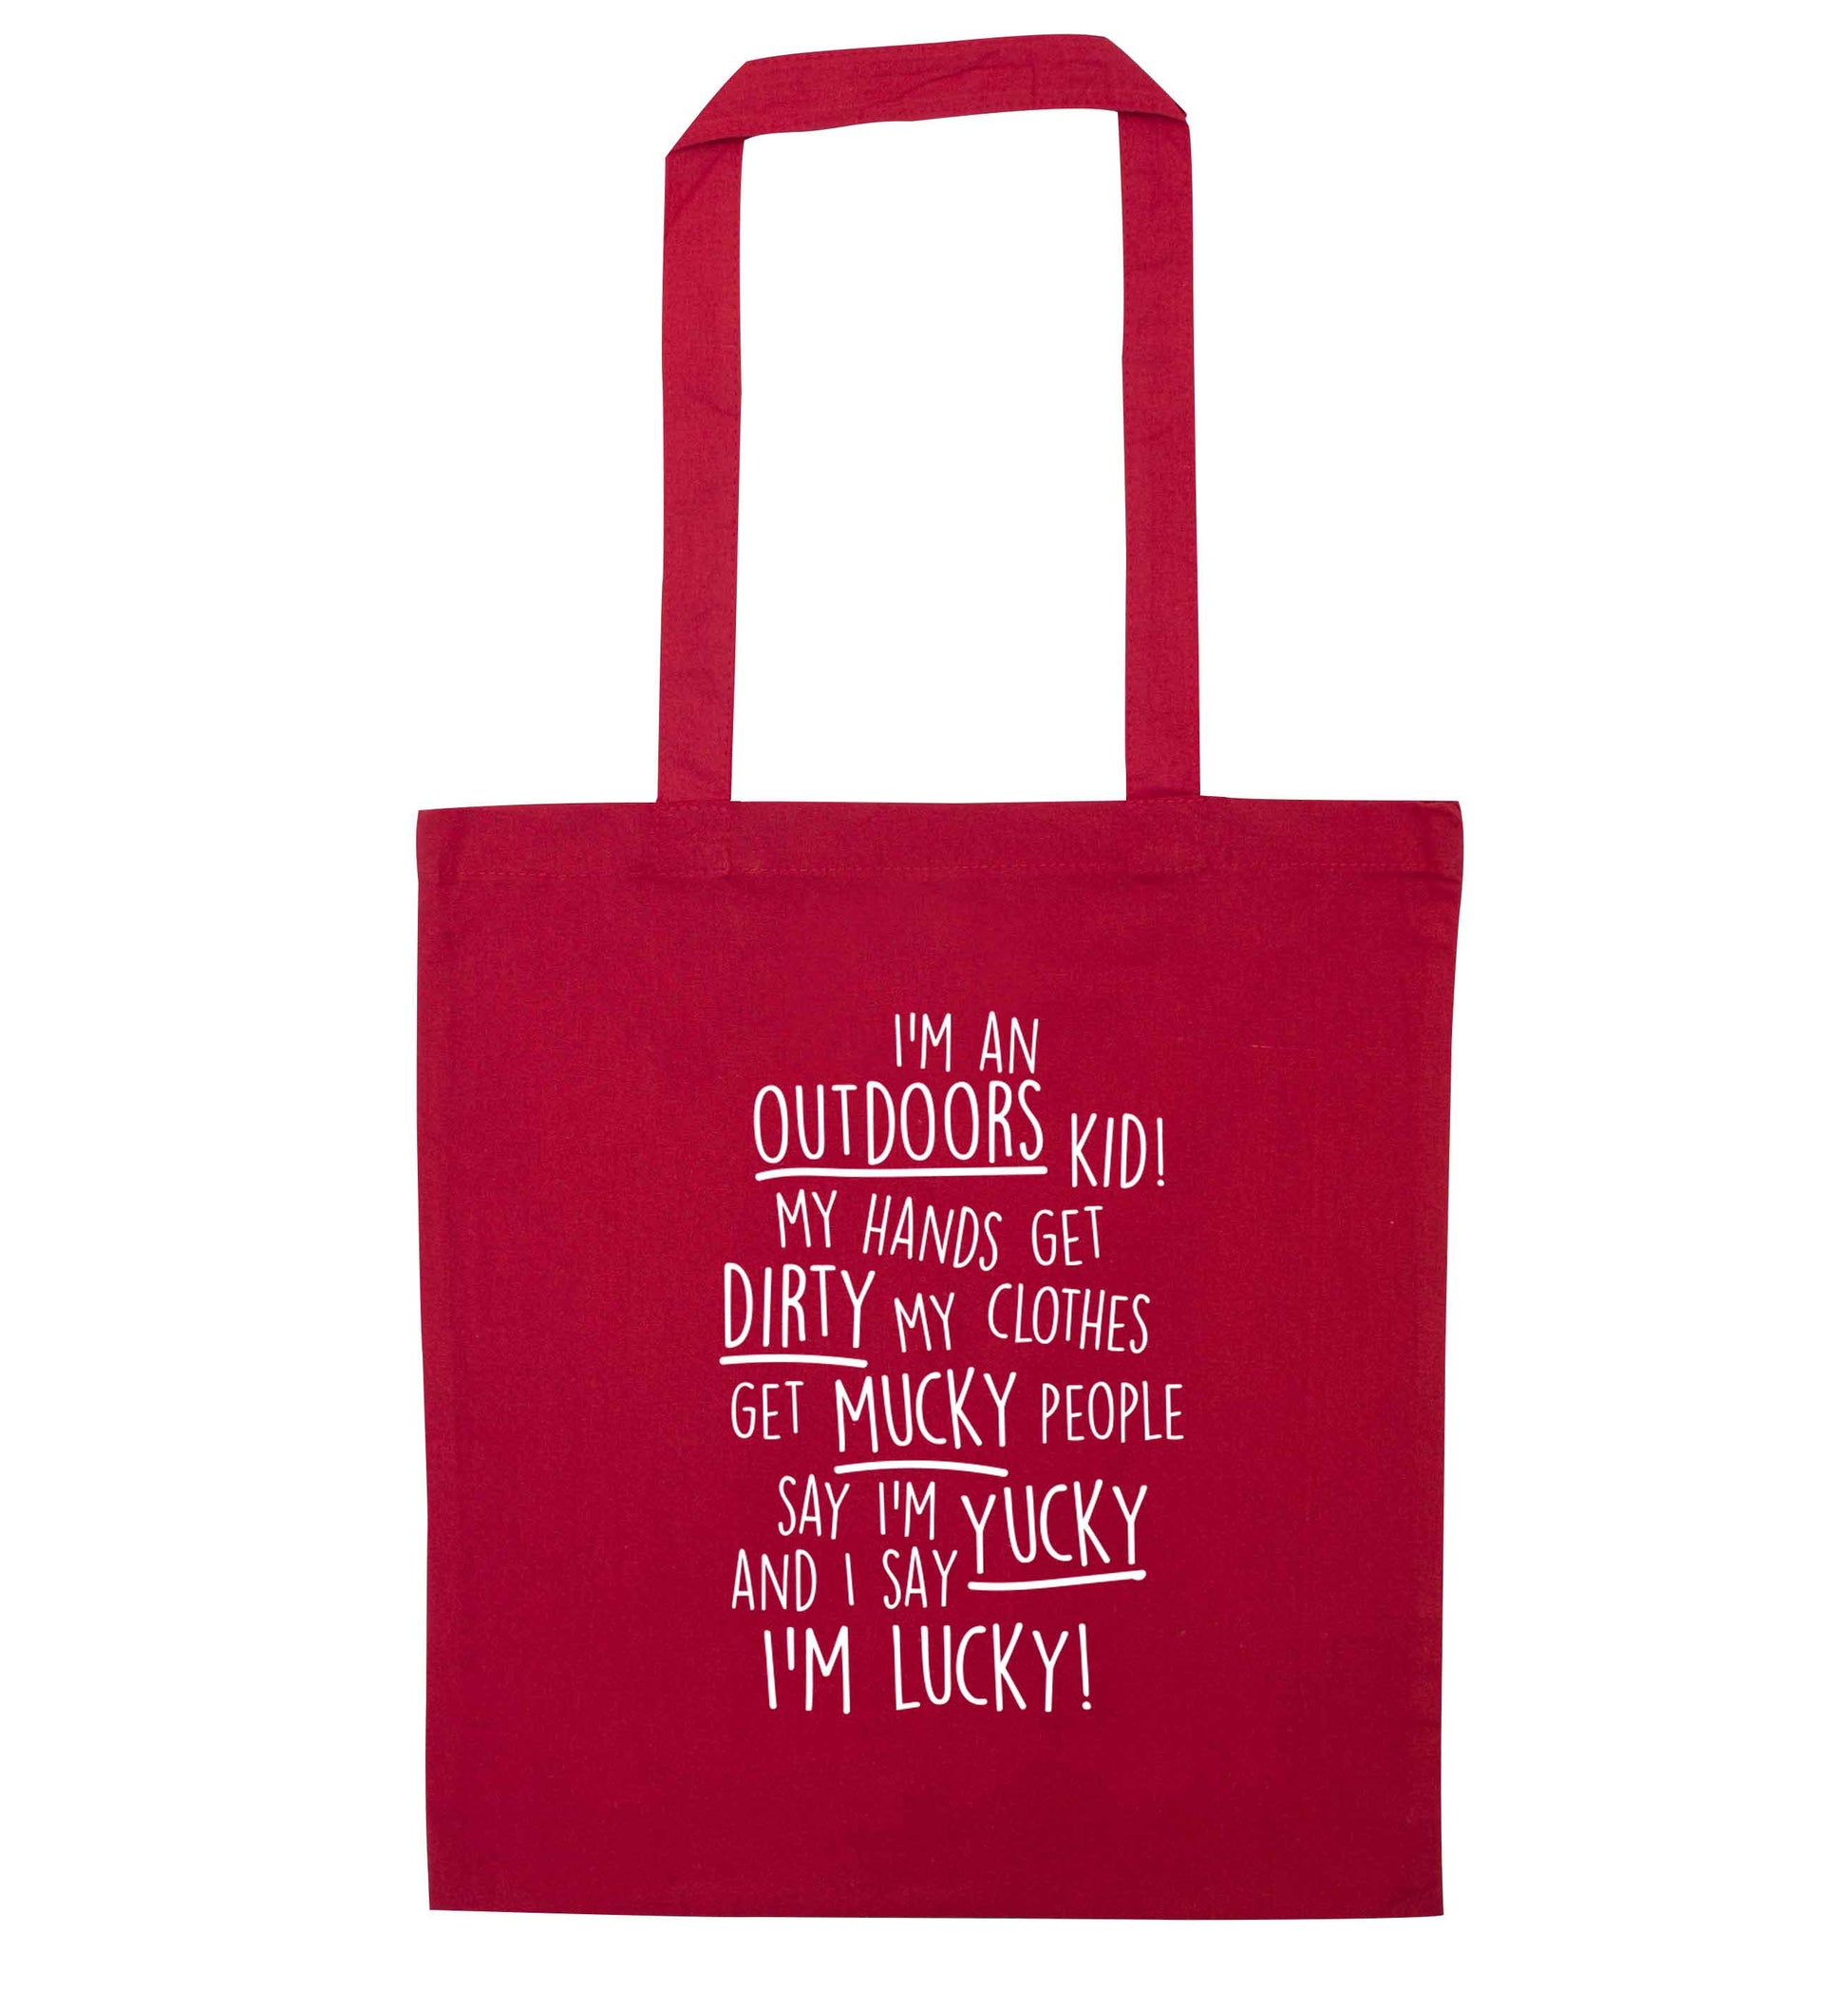 I'm an outdoors kid poem red tote bag